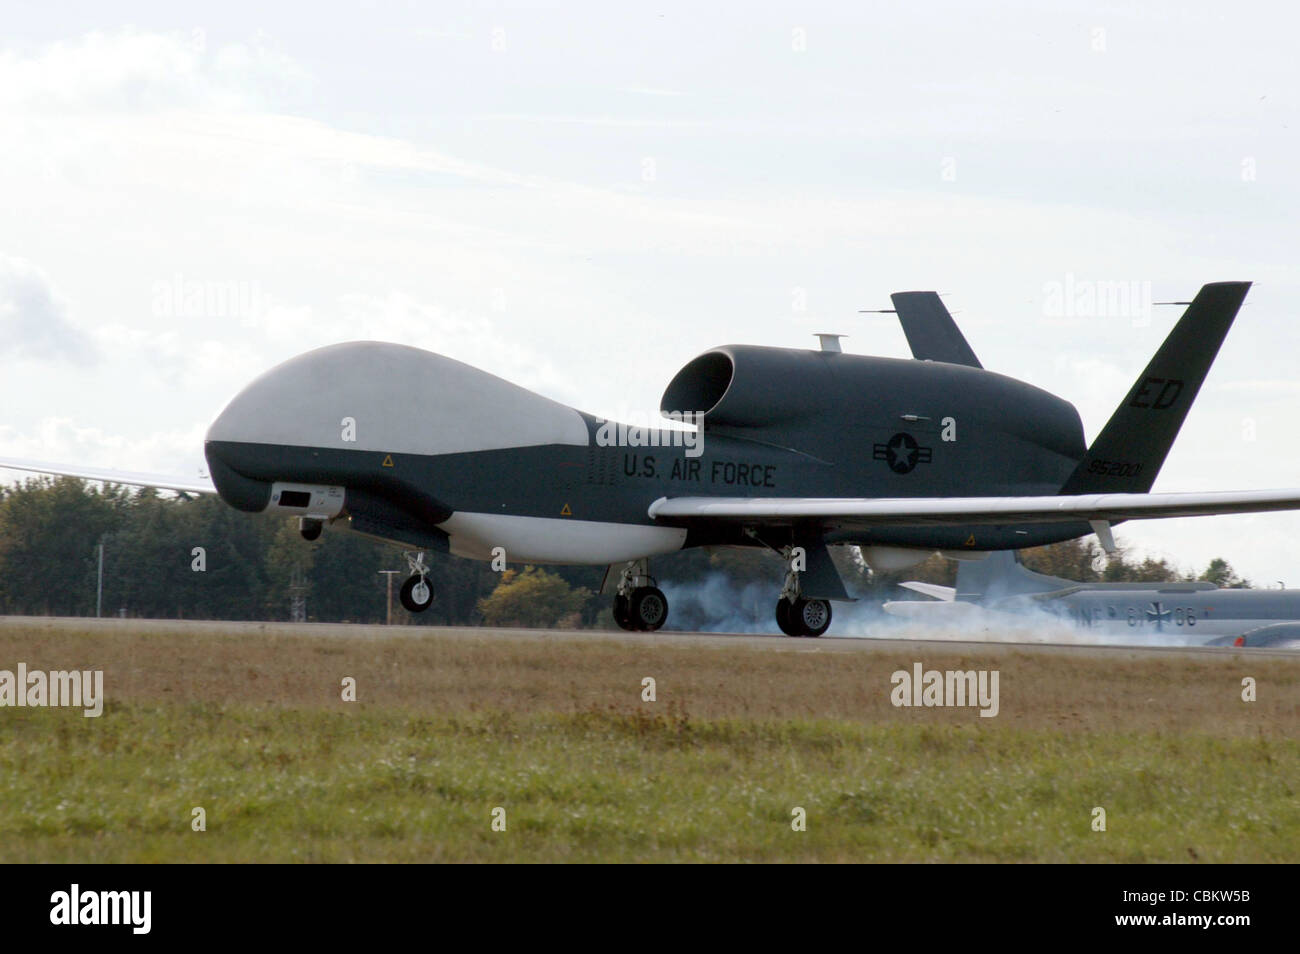 NORDHOLZ AIR BASE, Germany (AFPN) -- A Global Hawk unmanned aerial vehicle lands here after a demonstration sortie. The vehicle returned to Edwards Air Force Base, Calif., Nov. 7. Stock Photo